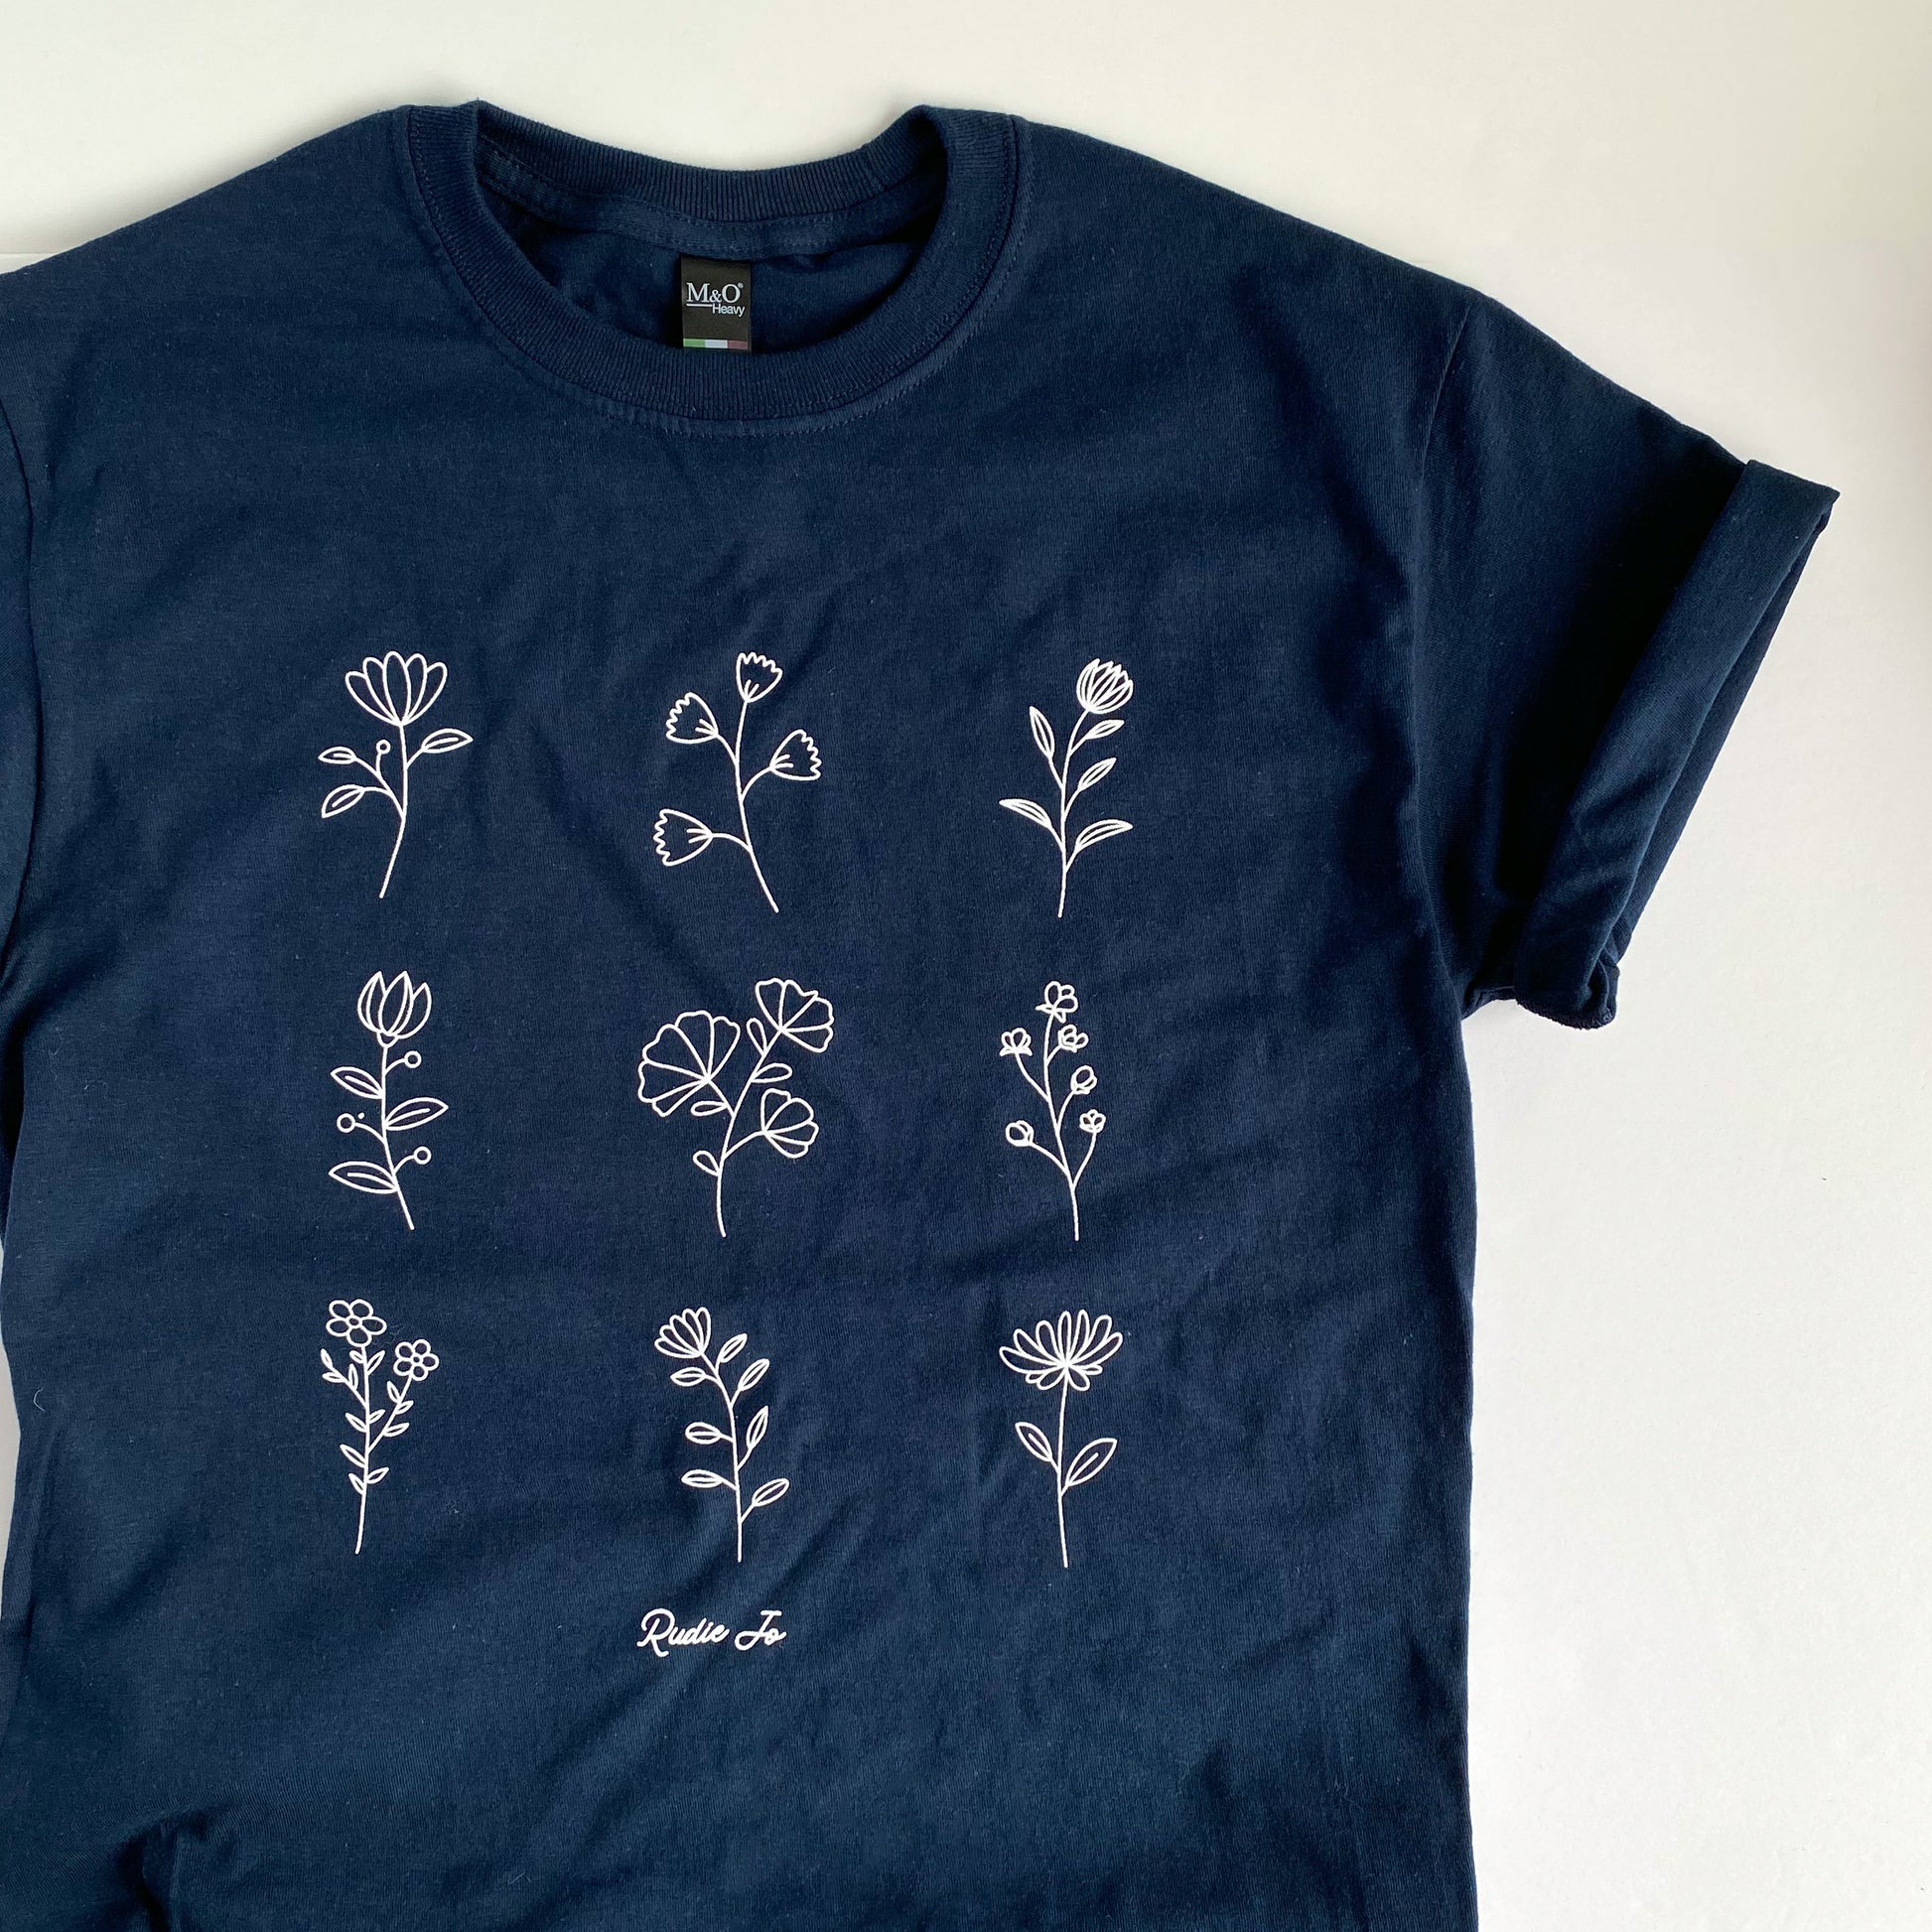 flat lay cotton navy blue t shirt with 9 white hand drawn floral stems printed on  the front in a 3x3 square with rudie jo logo below